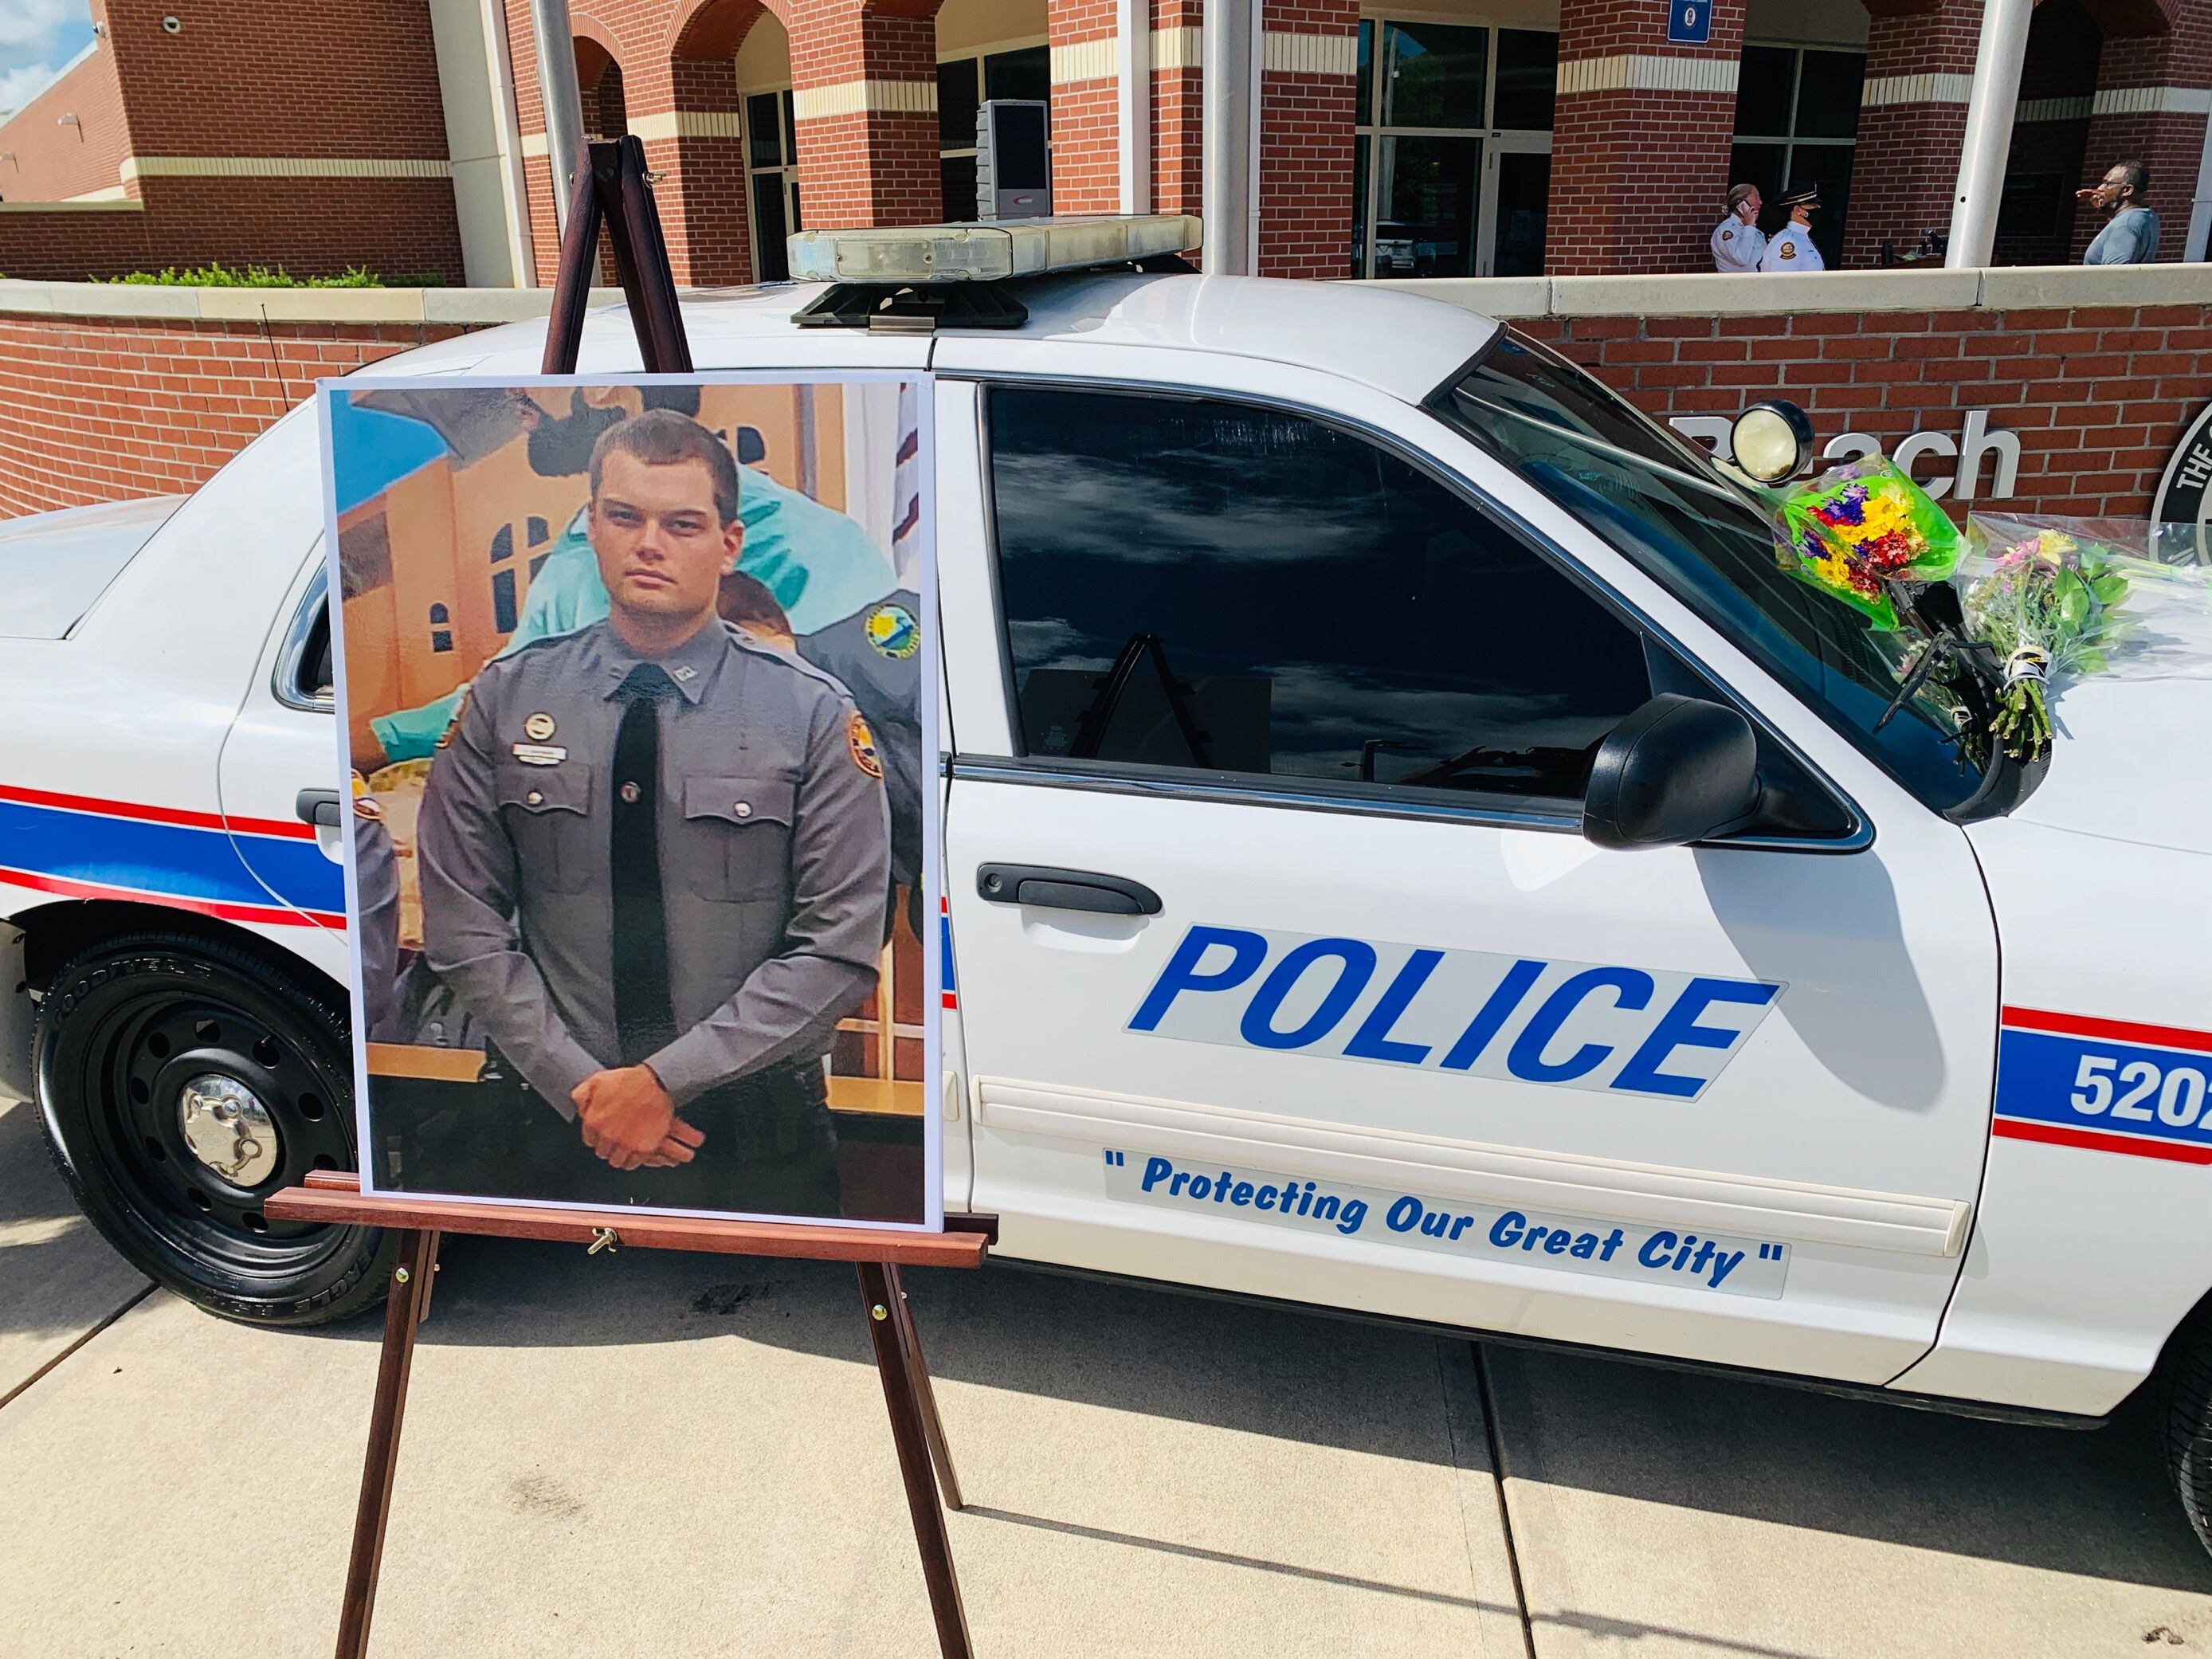 Slain Daytona officer's patrol car signed with messages of honor